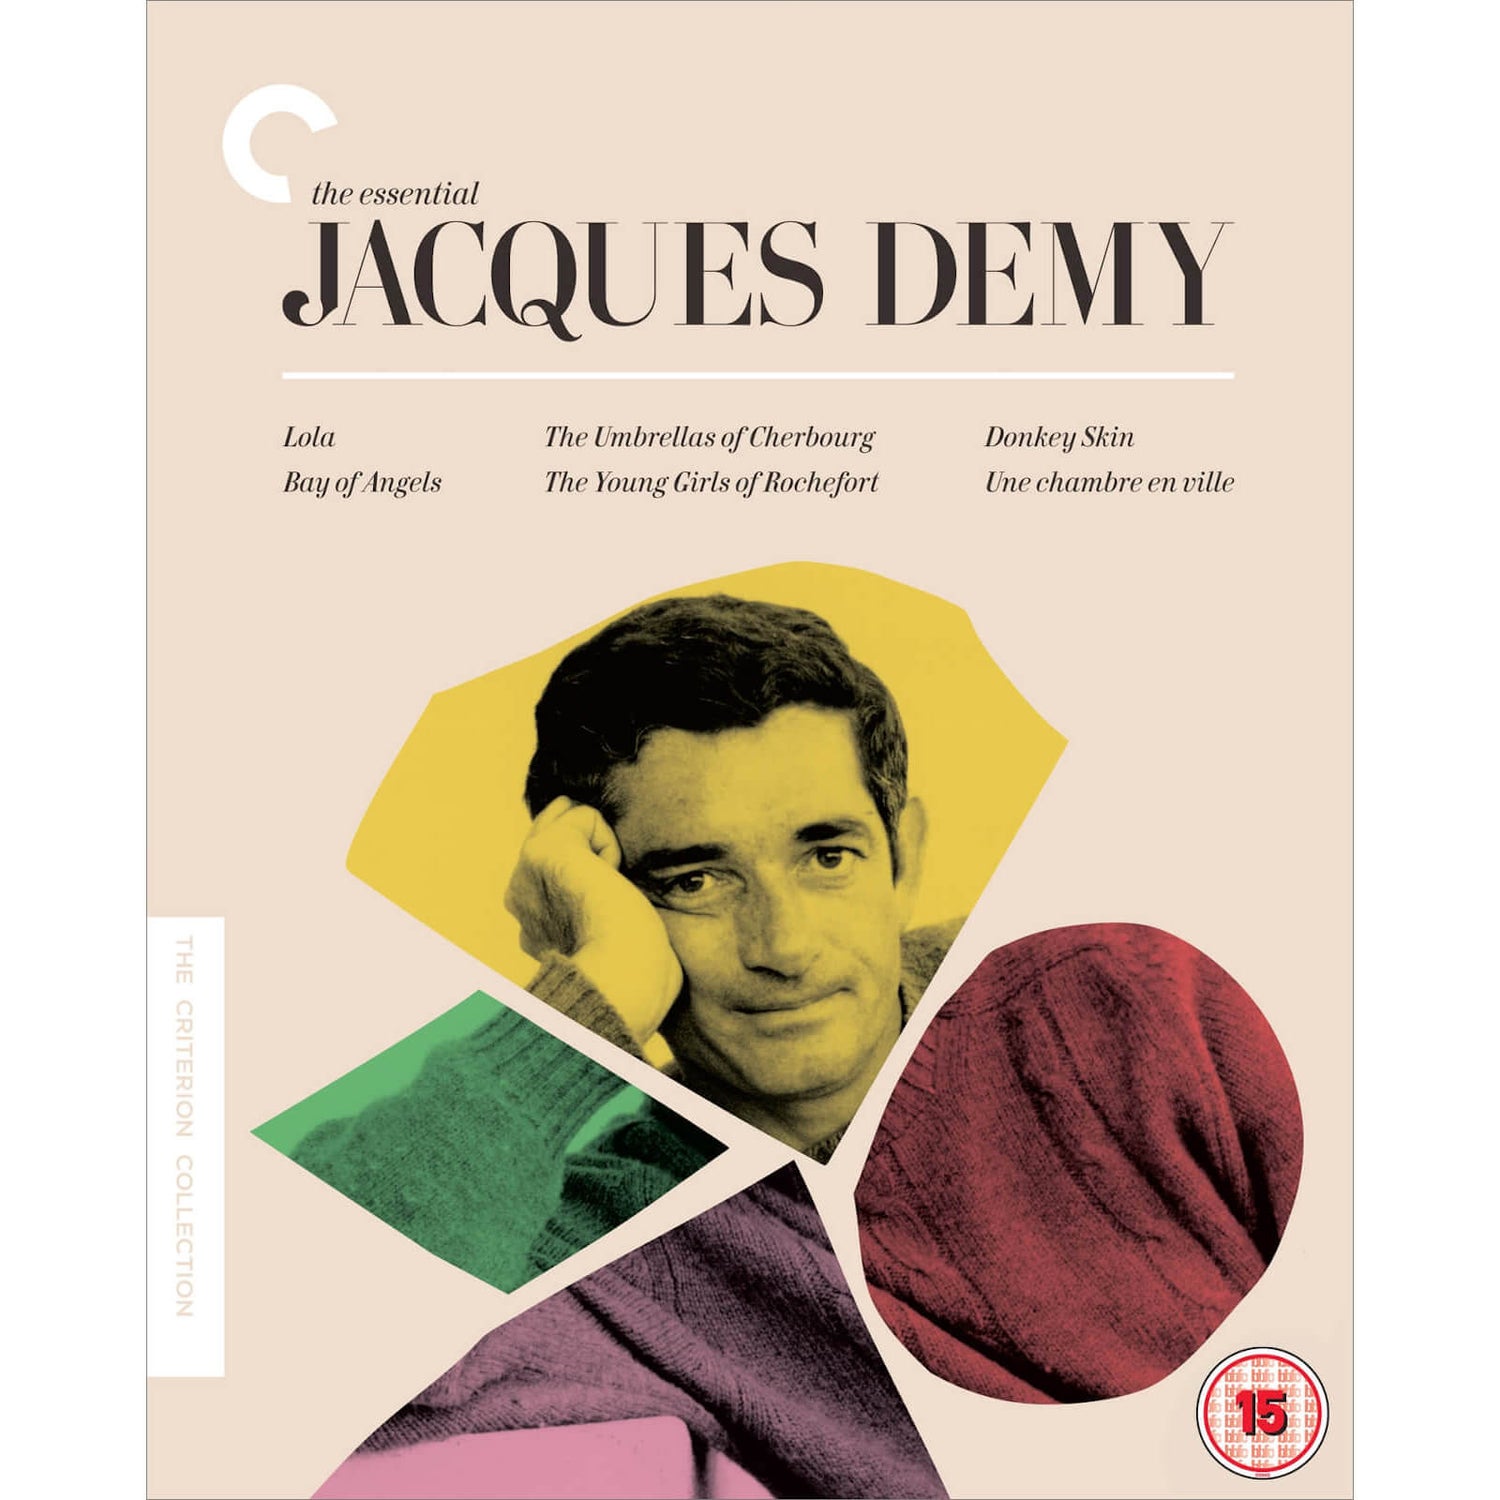 The Essential Jacques Demy - The Criterion Collection